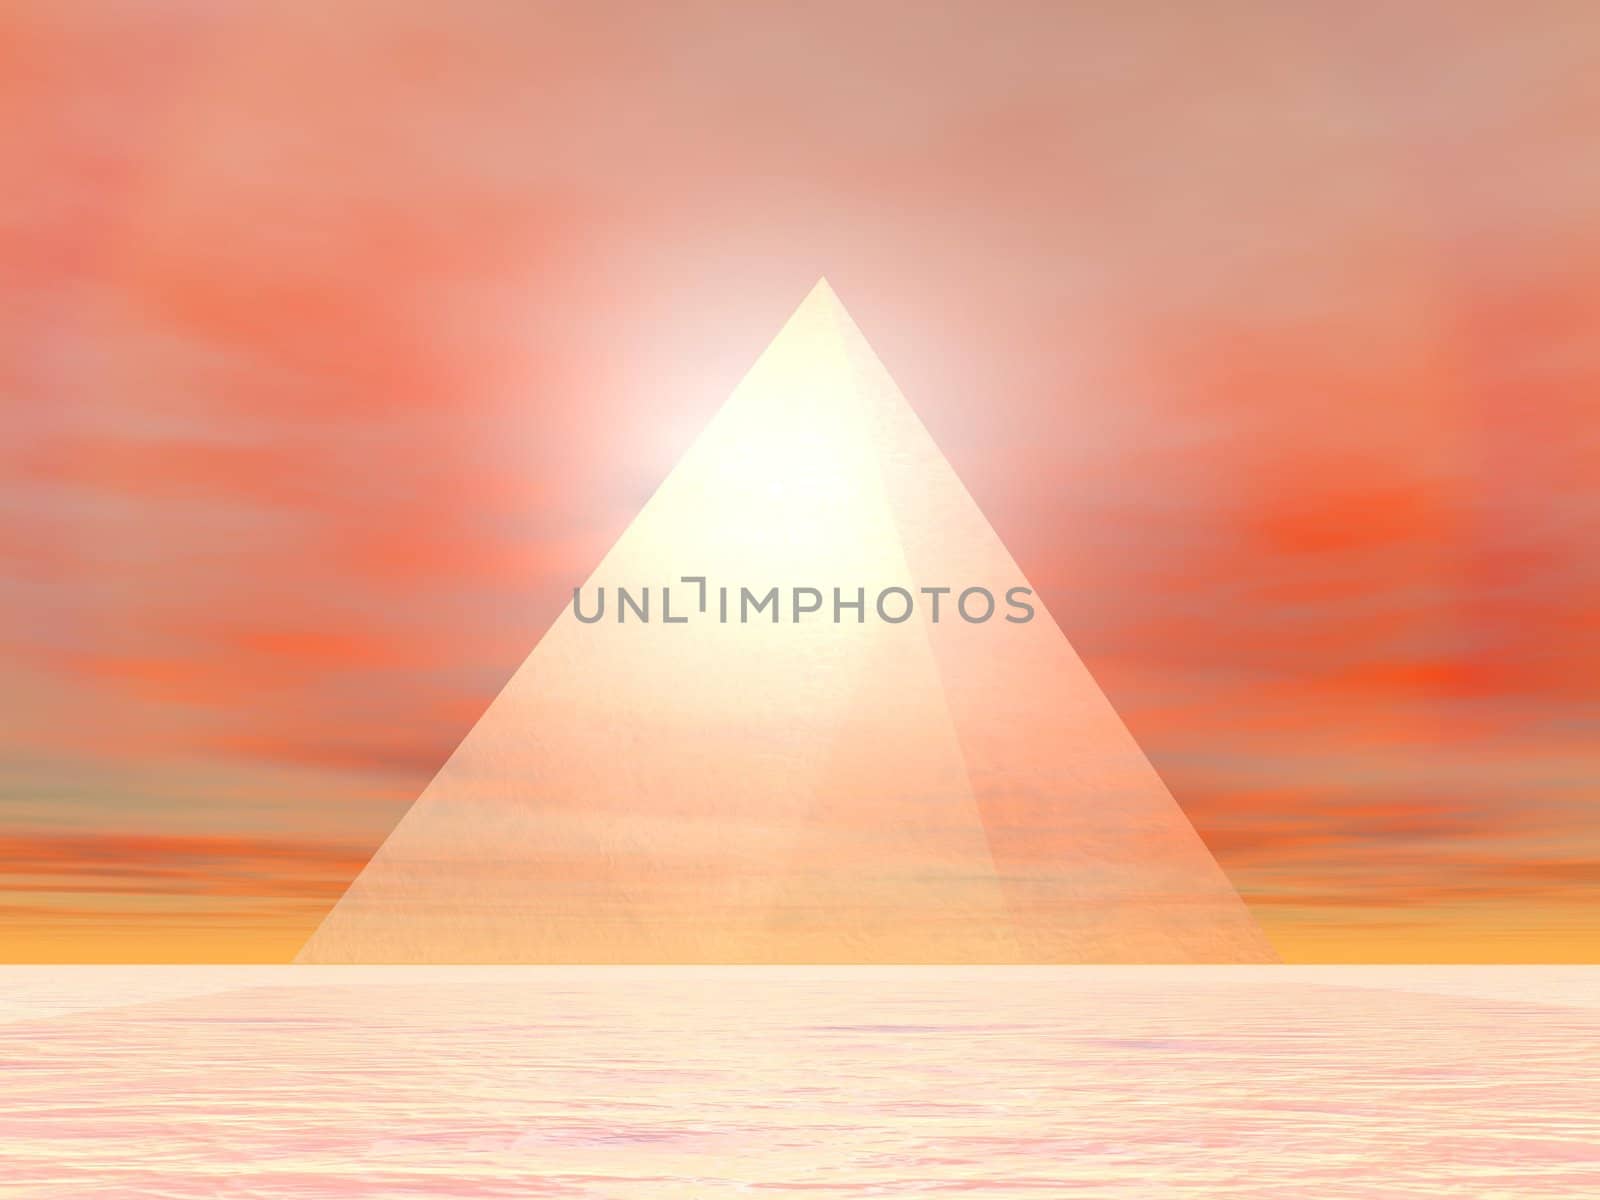 Transparent pyramid made of glass in front of sunset